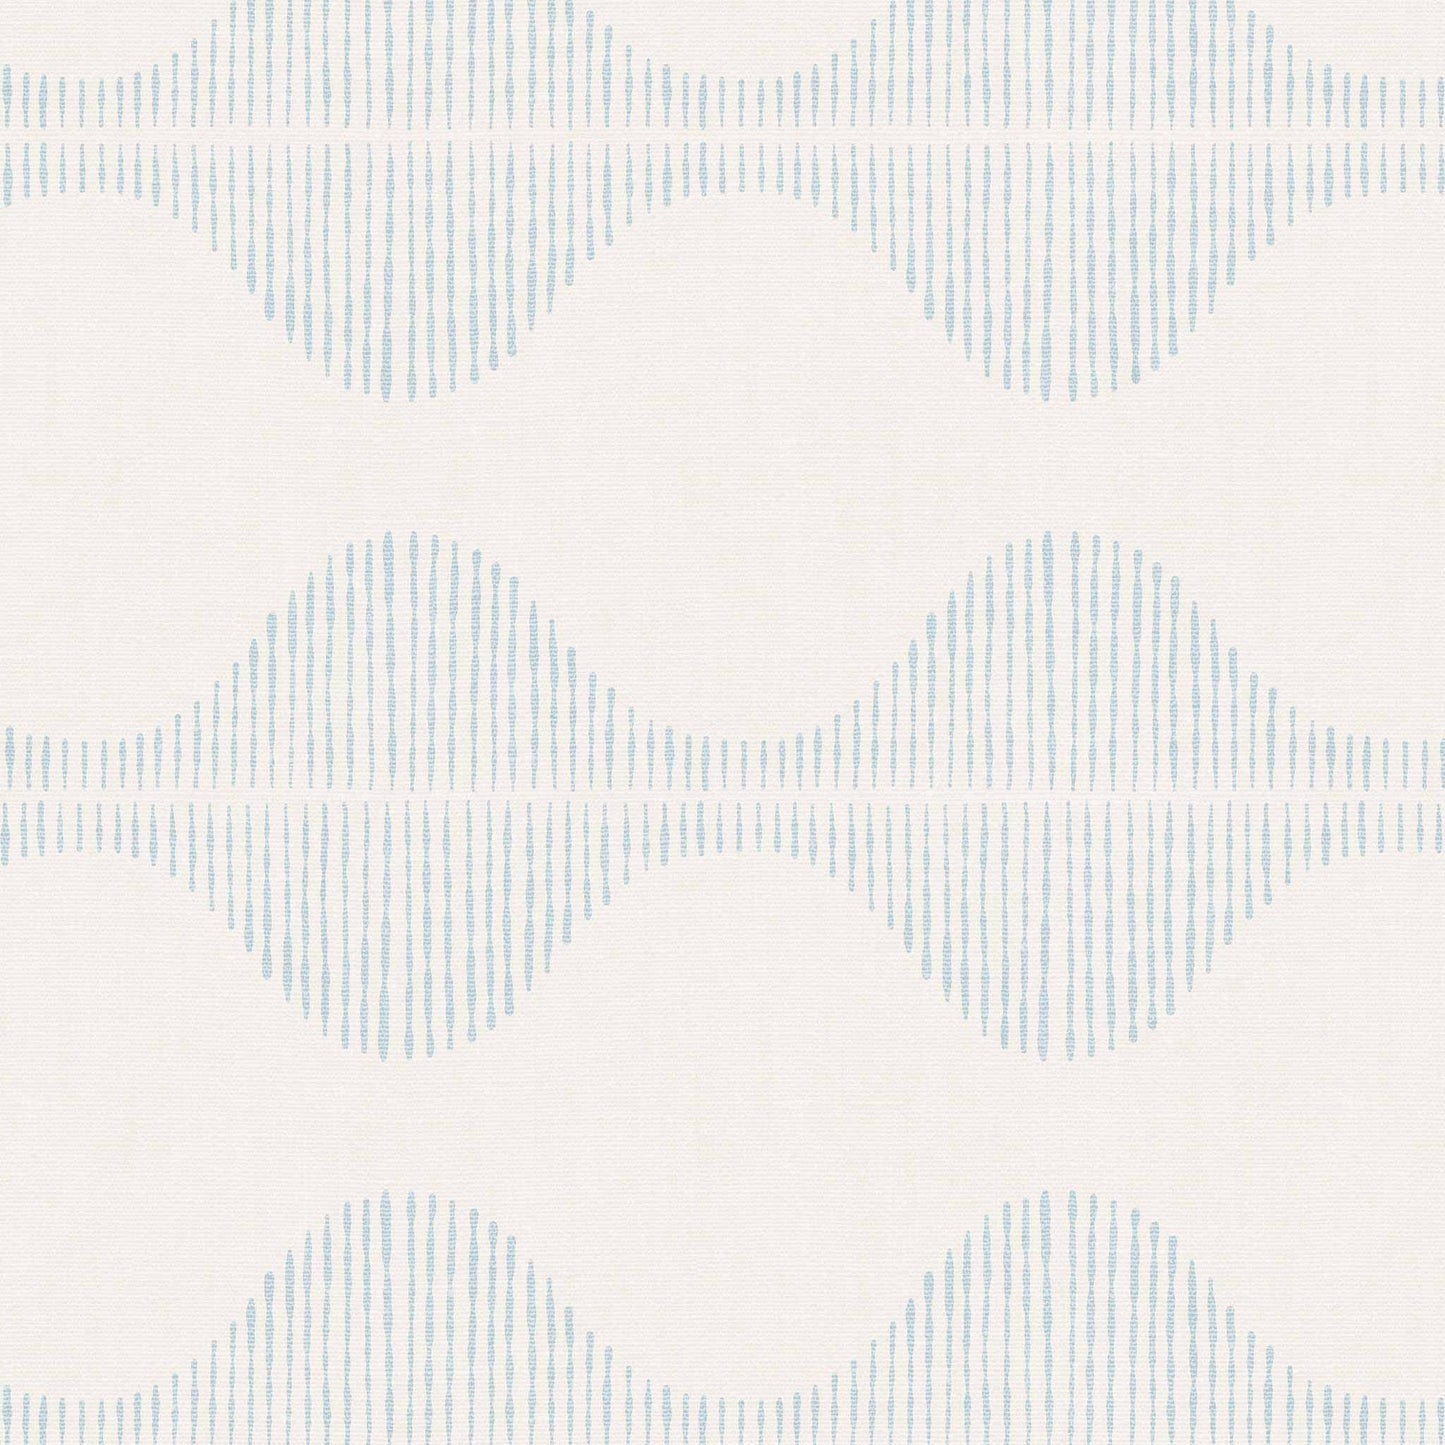 Bring a wave of modern beauty to any room with this stunning Wavy Line Art Wallpaper! The subtle pale blue on cream design is completely gorgeous and sure to make a statement in any space.